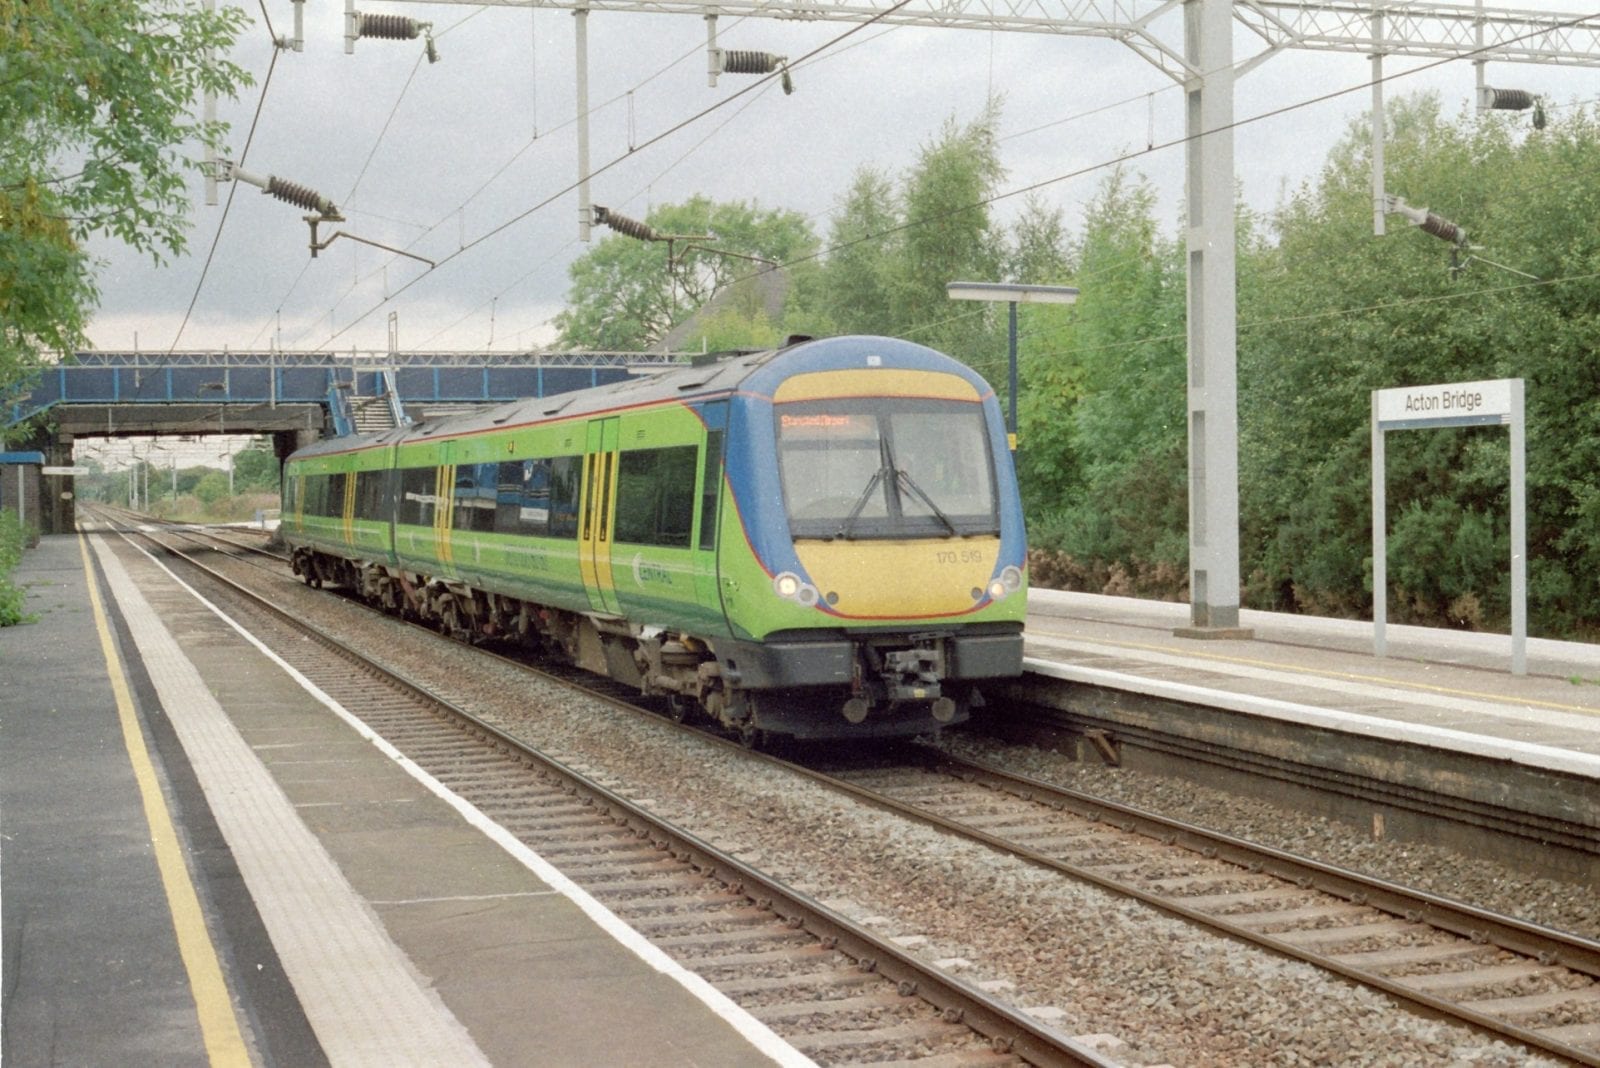 170 519 Central Trains at Acton Bridge bound for Stansted Airport  13 Sept 2000<br />©2021 MCRUA